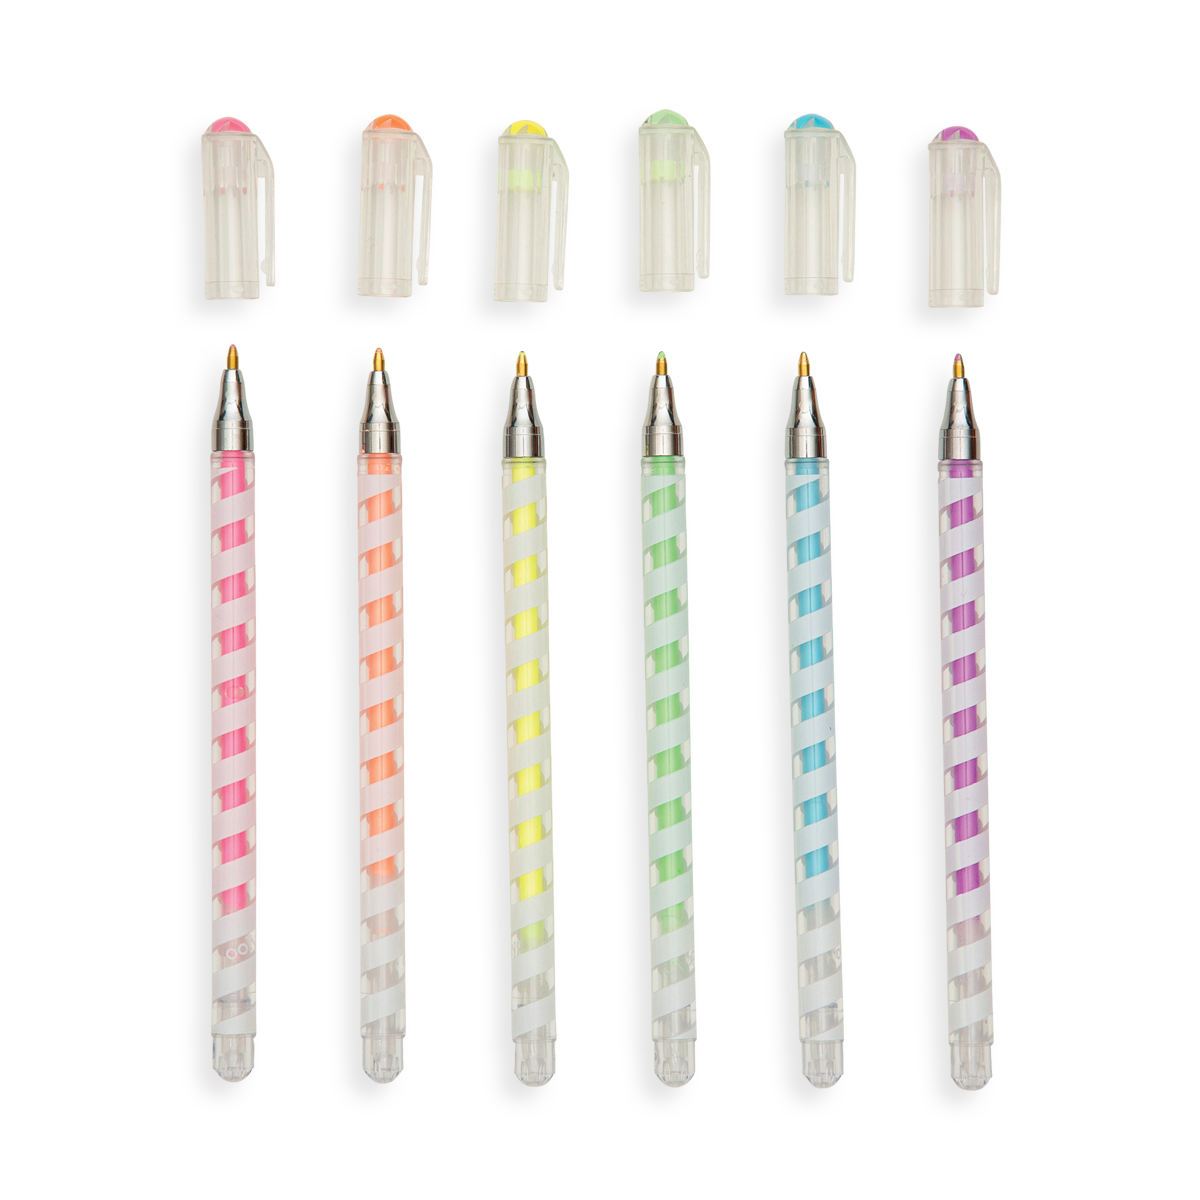 Image of Totally Taffy Gel Pens lined up with caps off